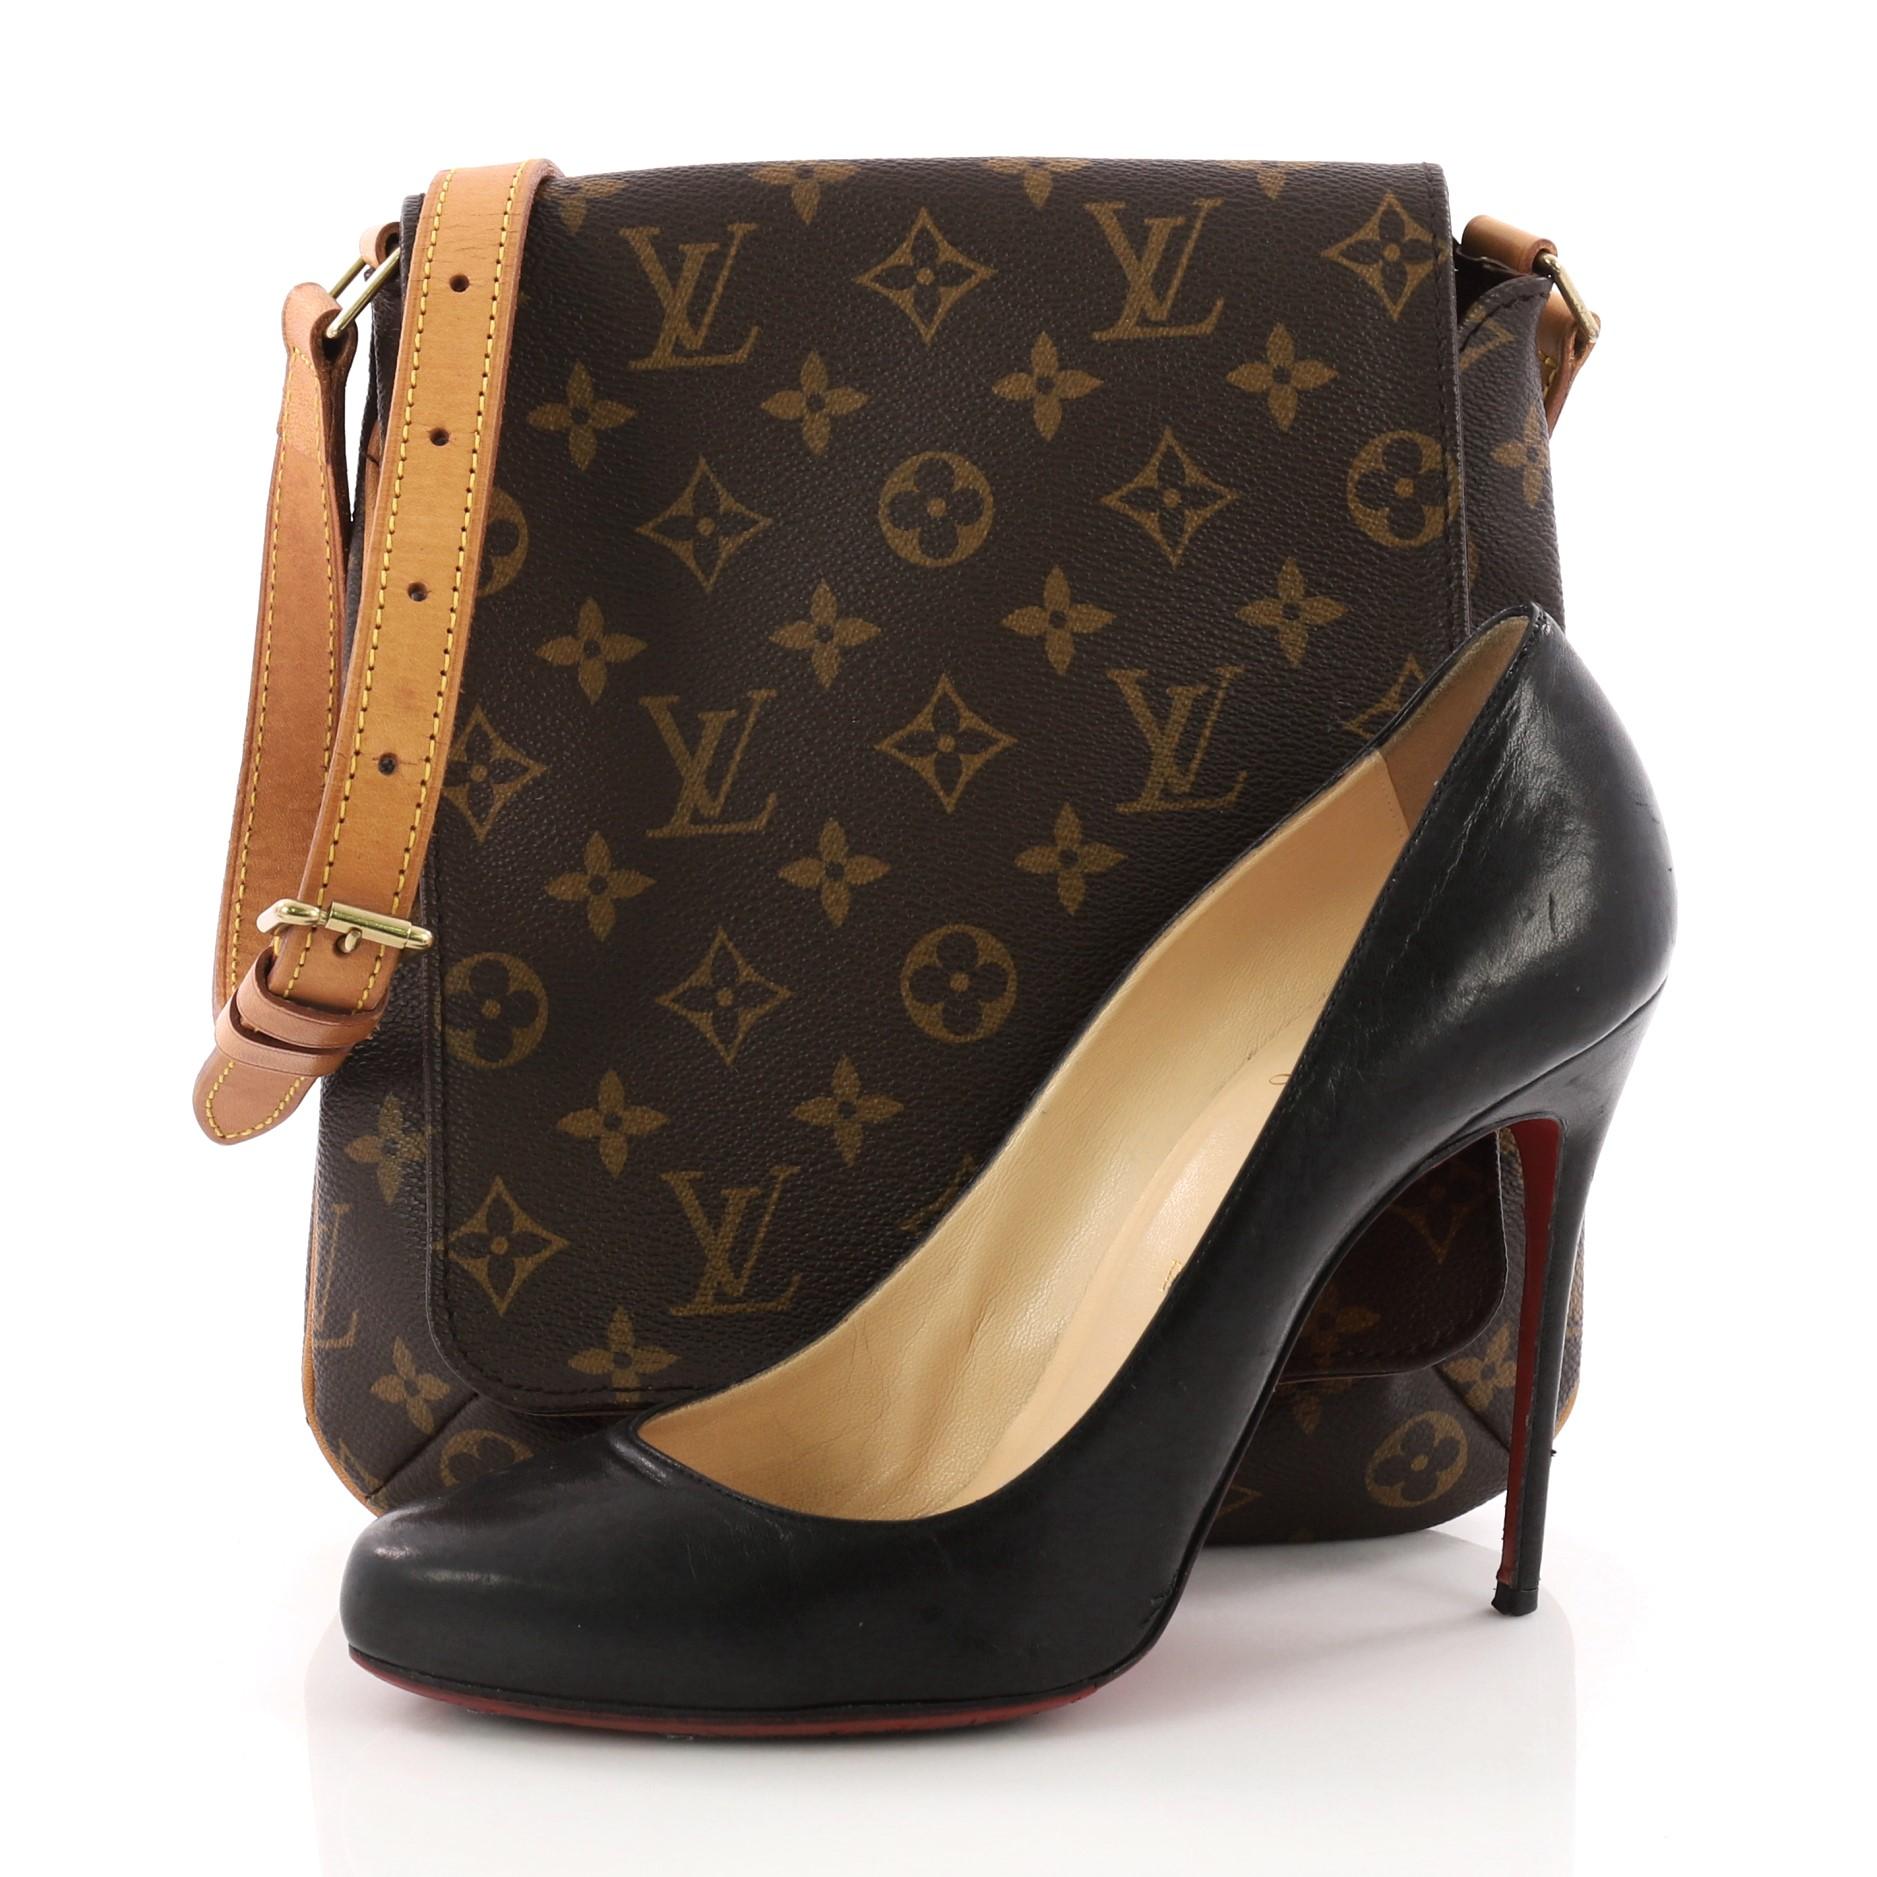 This authentic Louis Vuitton Musette Salsa Handbag Monogram Canvas PM is minimalist and functional shoulder bag perfect for the modern woman. Crafted from classic brown monogram coated canvas, this bag features adjustable cowhide leather strap, full